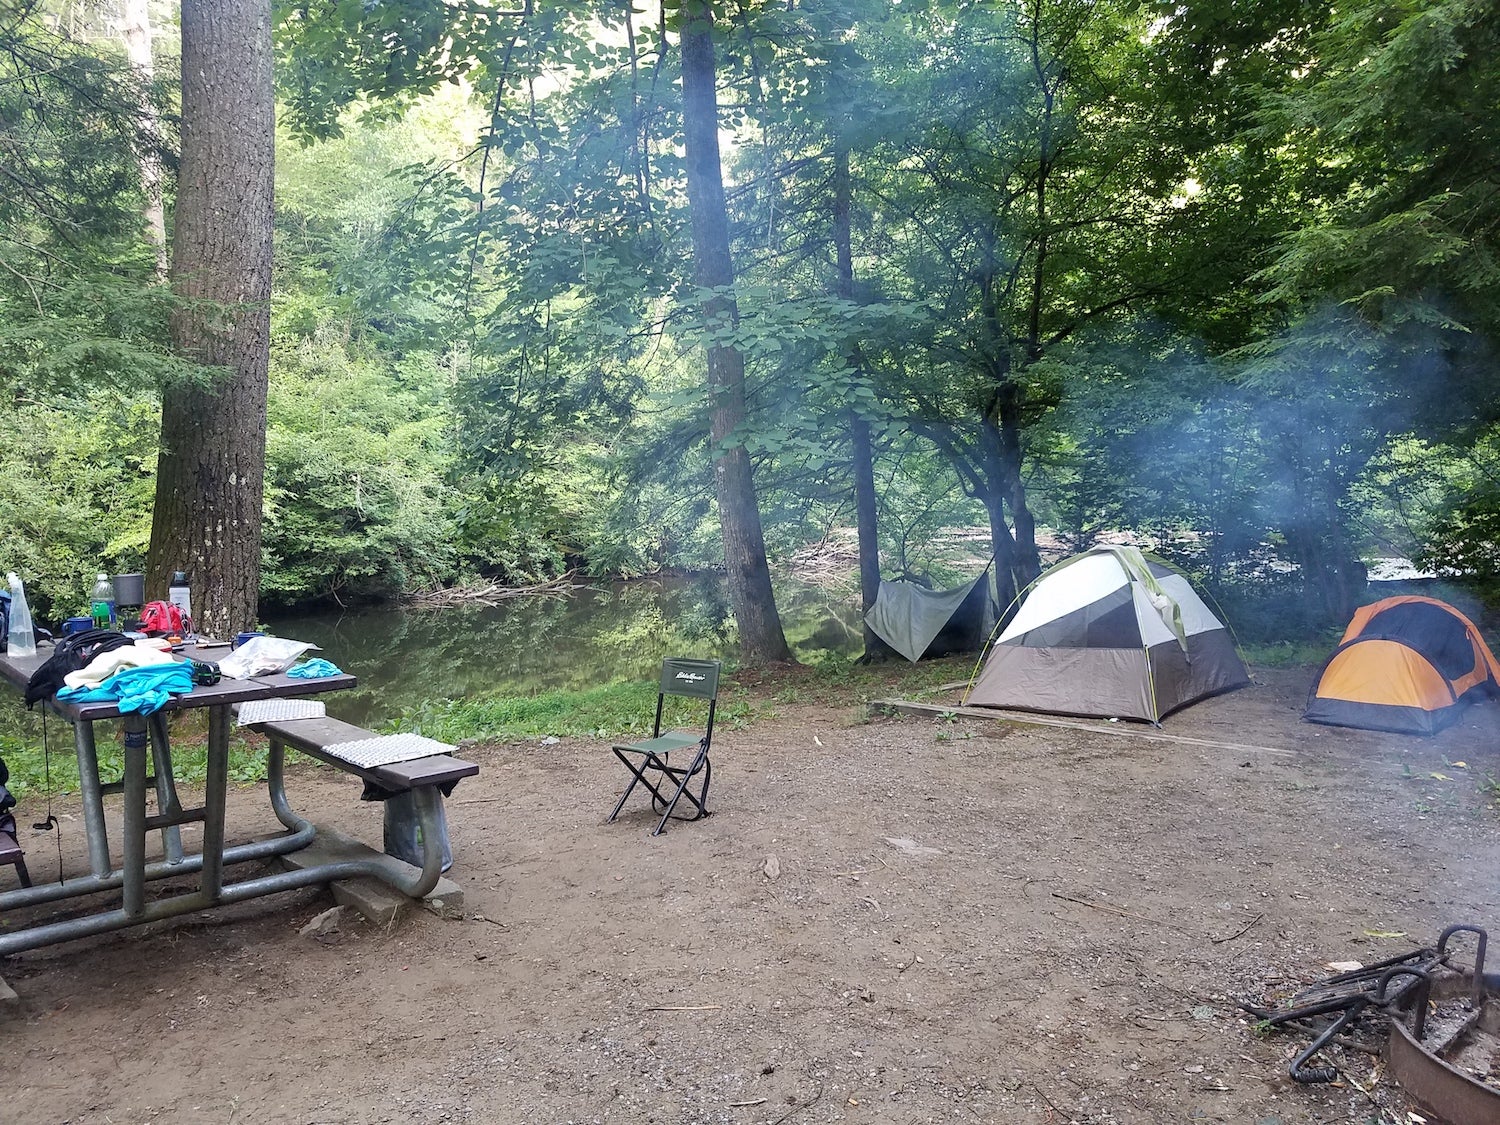 wooded, riverside campsite with multiple tents and a full picnic table at a...